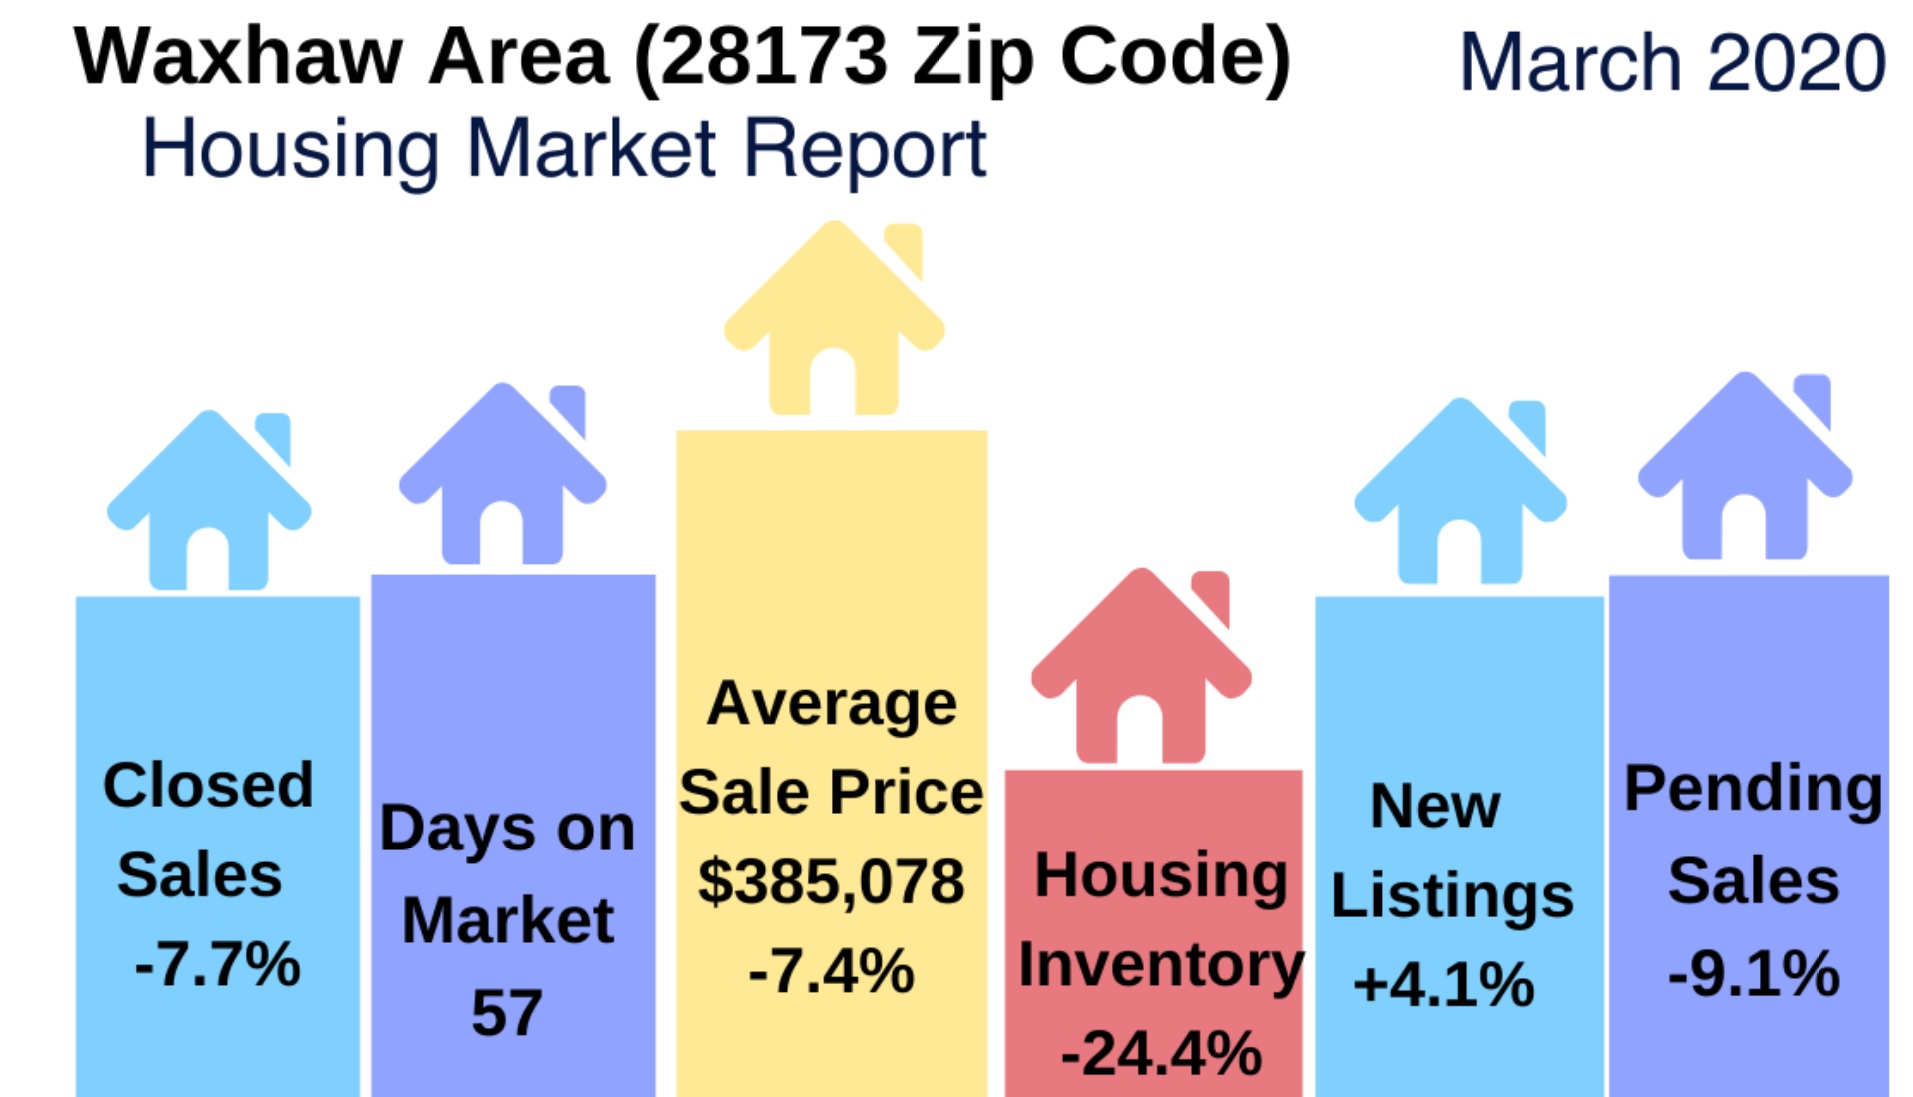 Waxhaw Area Real Estate Report: March 2020